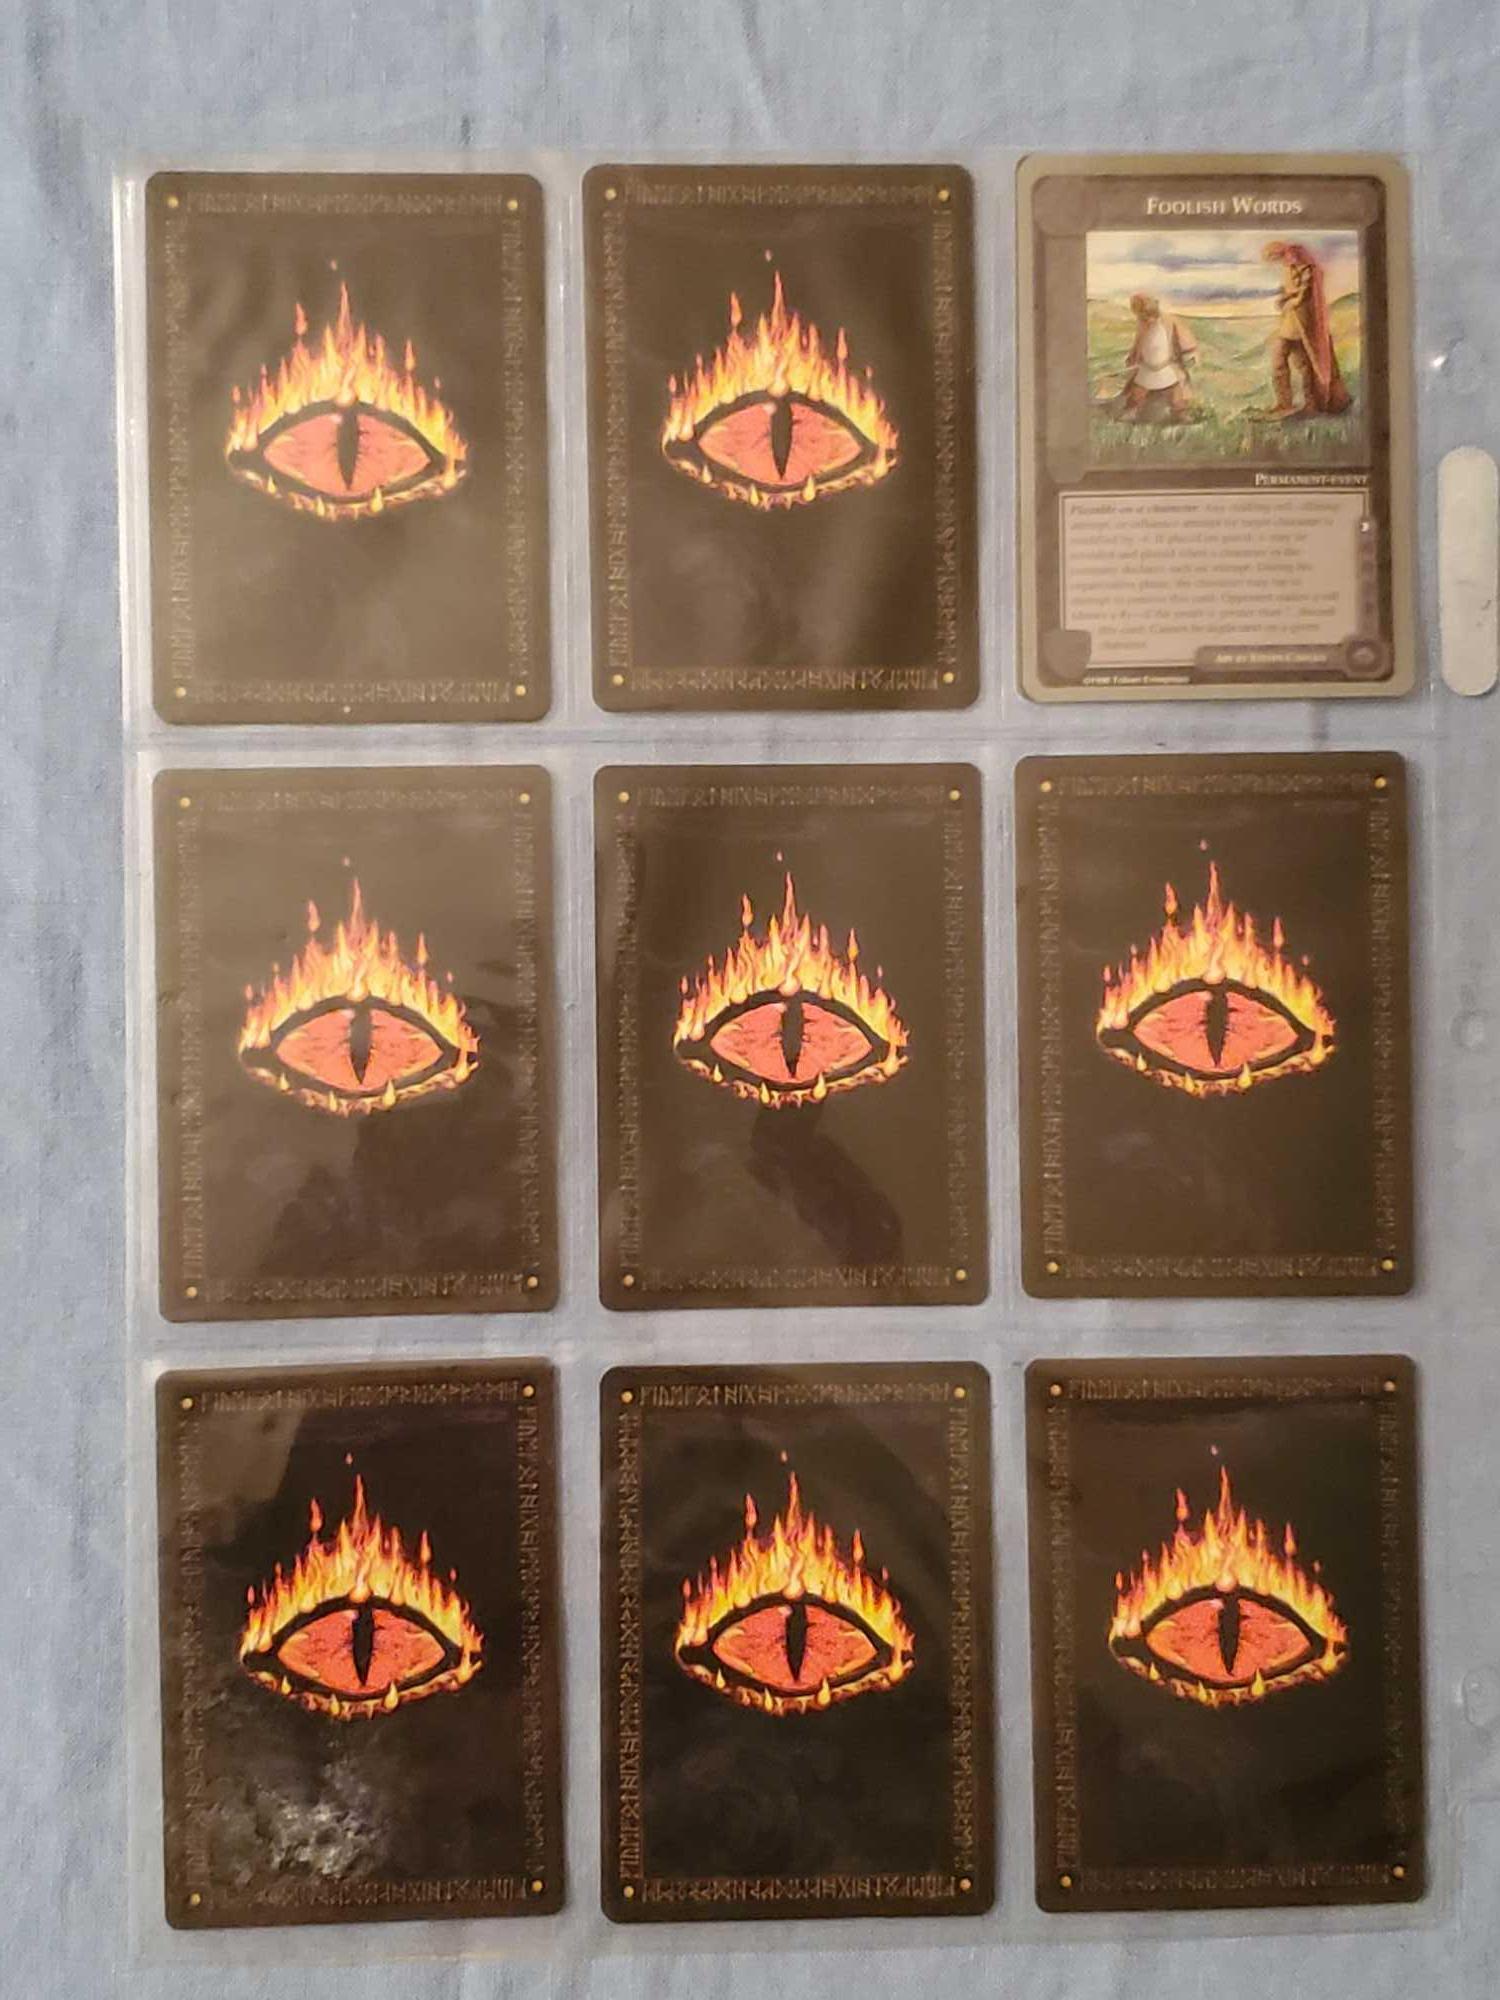 700+ 1990s MECCG Middile Earth Collectible Card Game Cards with Lidless Eye Backs